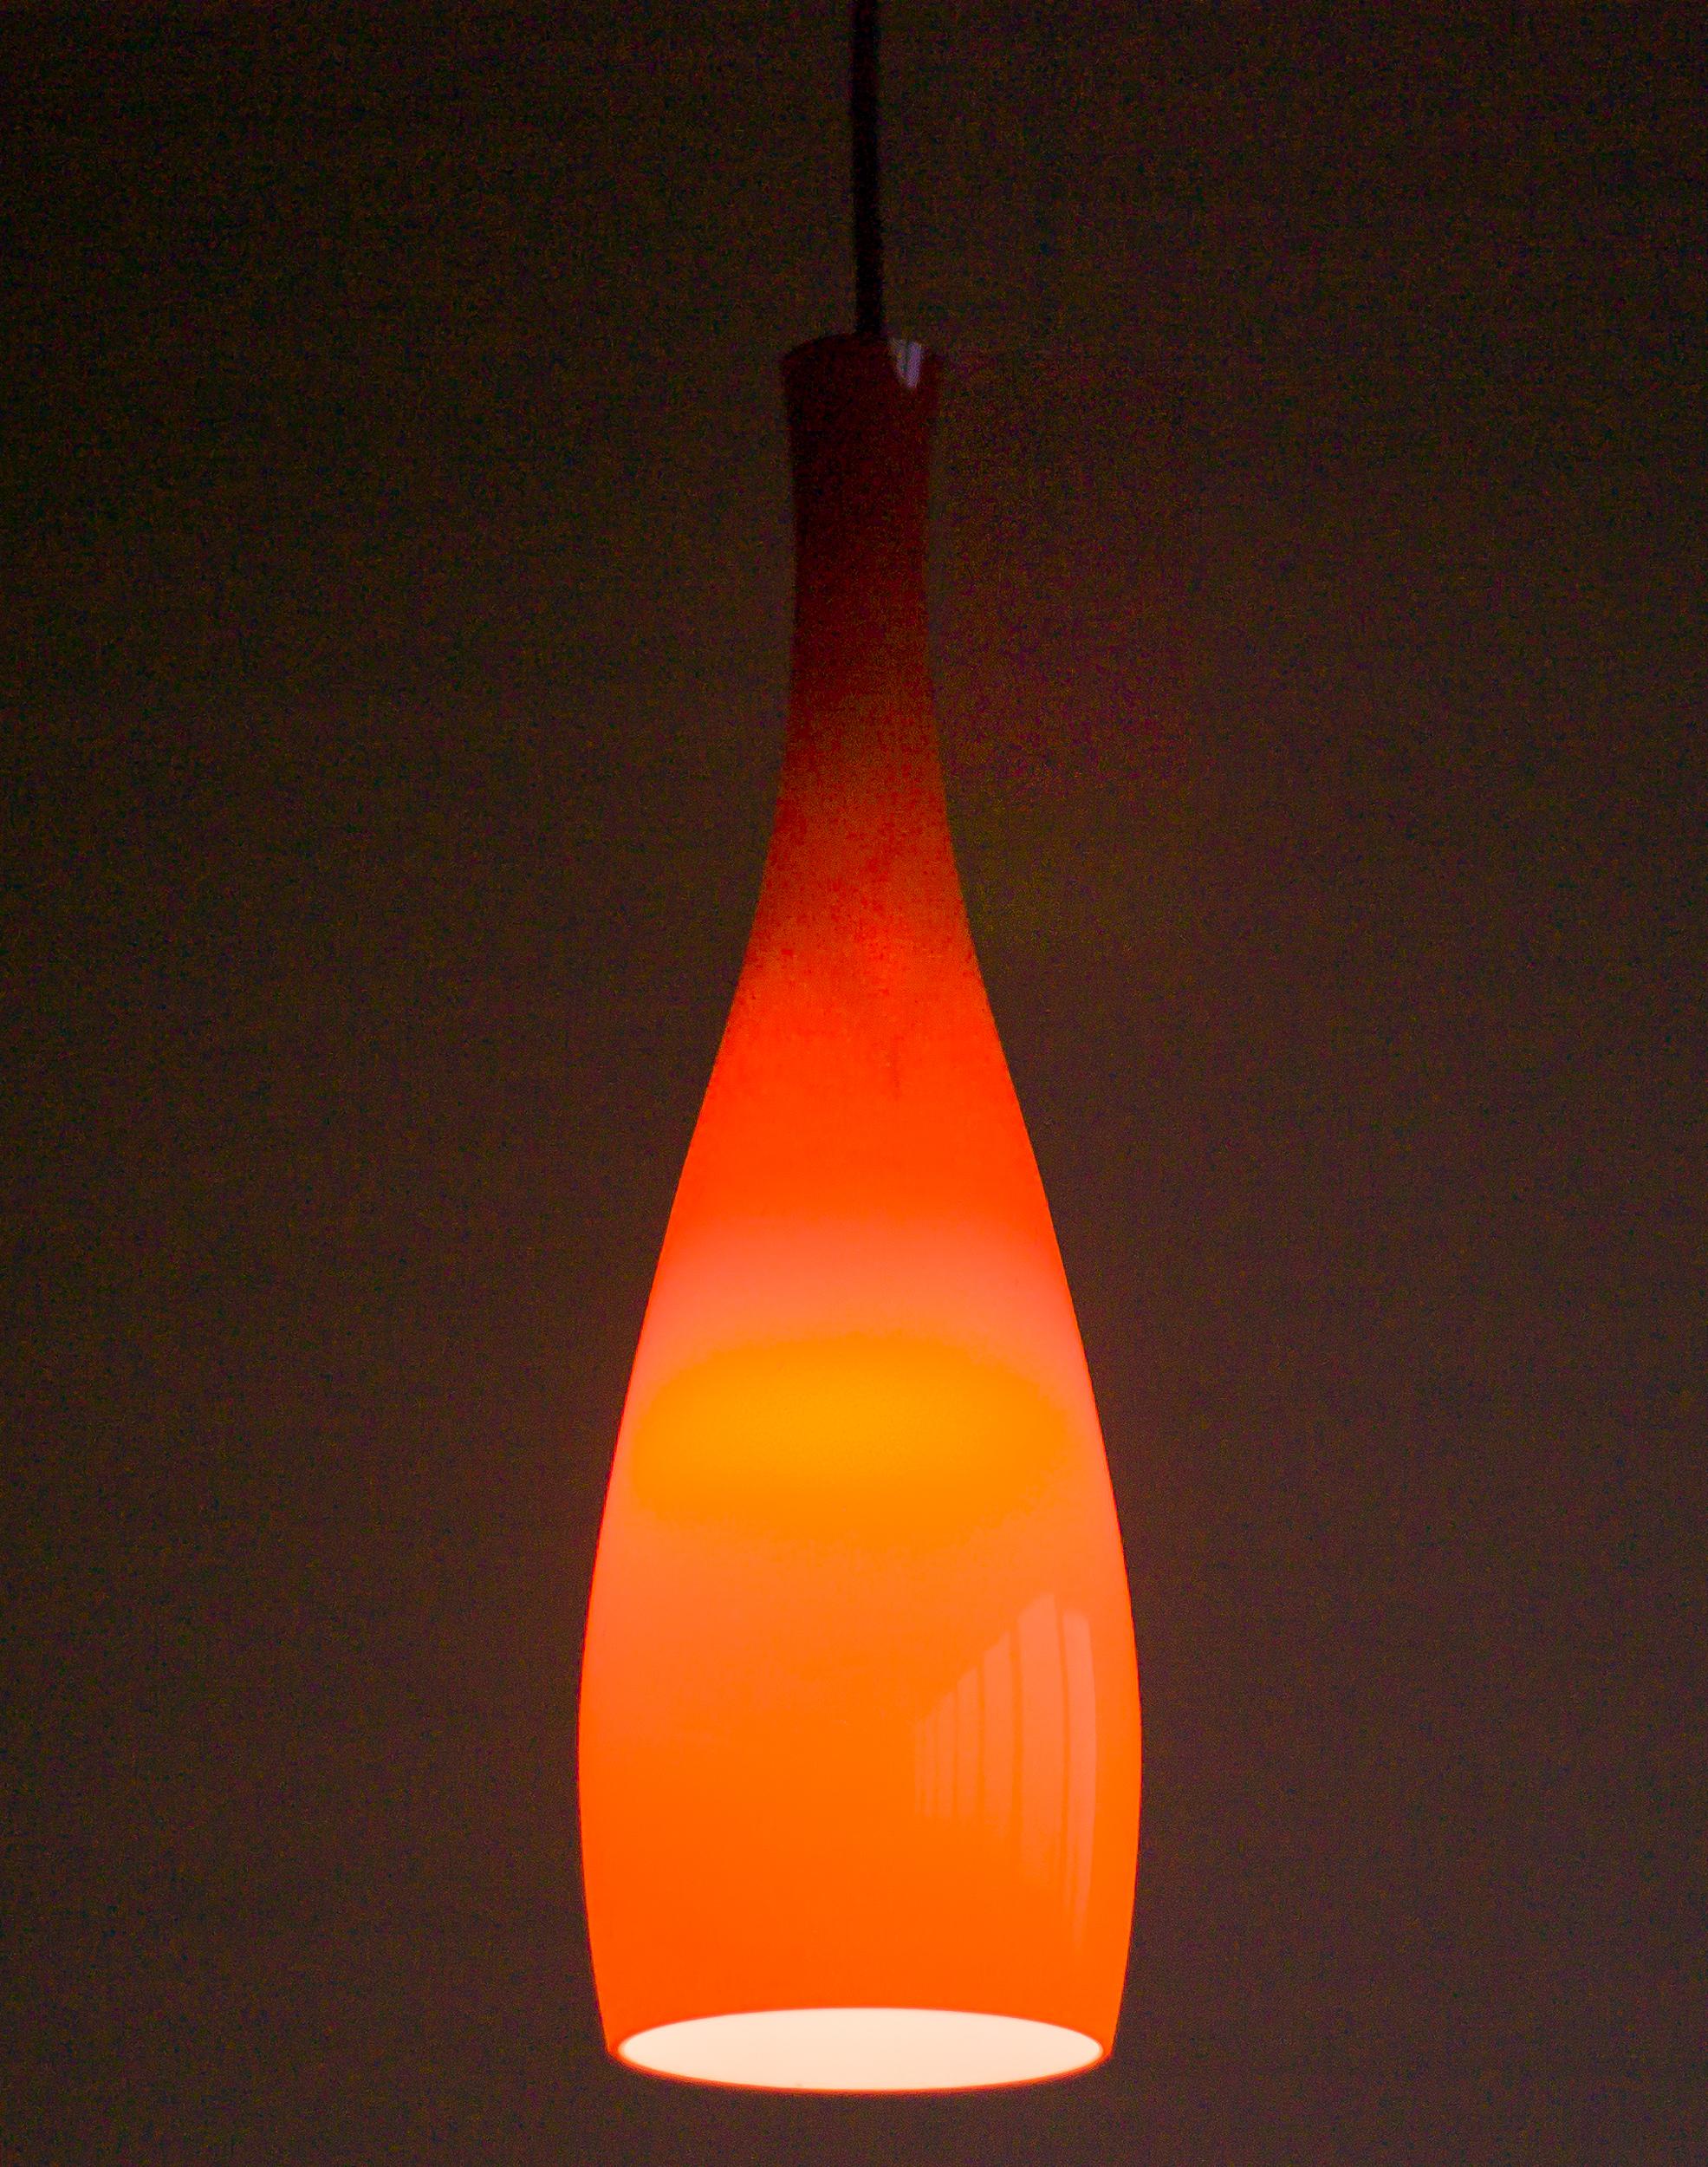 Tall coral colored opaline glass pendant designed in 1963 by Jacob E. Bang for Fog & Mørup, Denmark.

Jacob Bang was a Danish glass designer known for his innovative and high-quality designs. 
He was one of the leading figures in the Danish modern